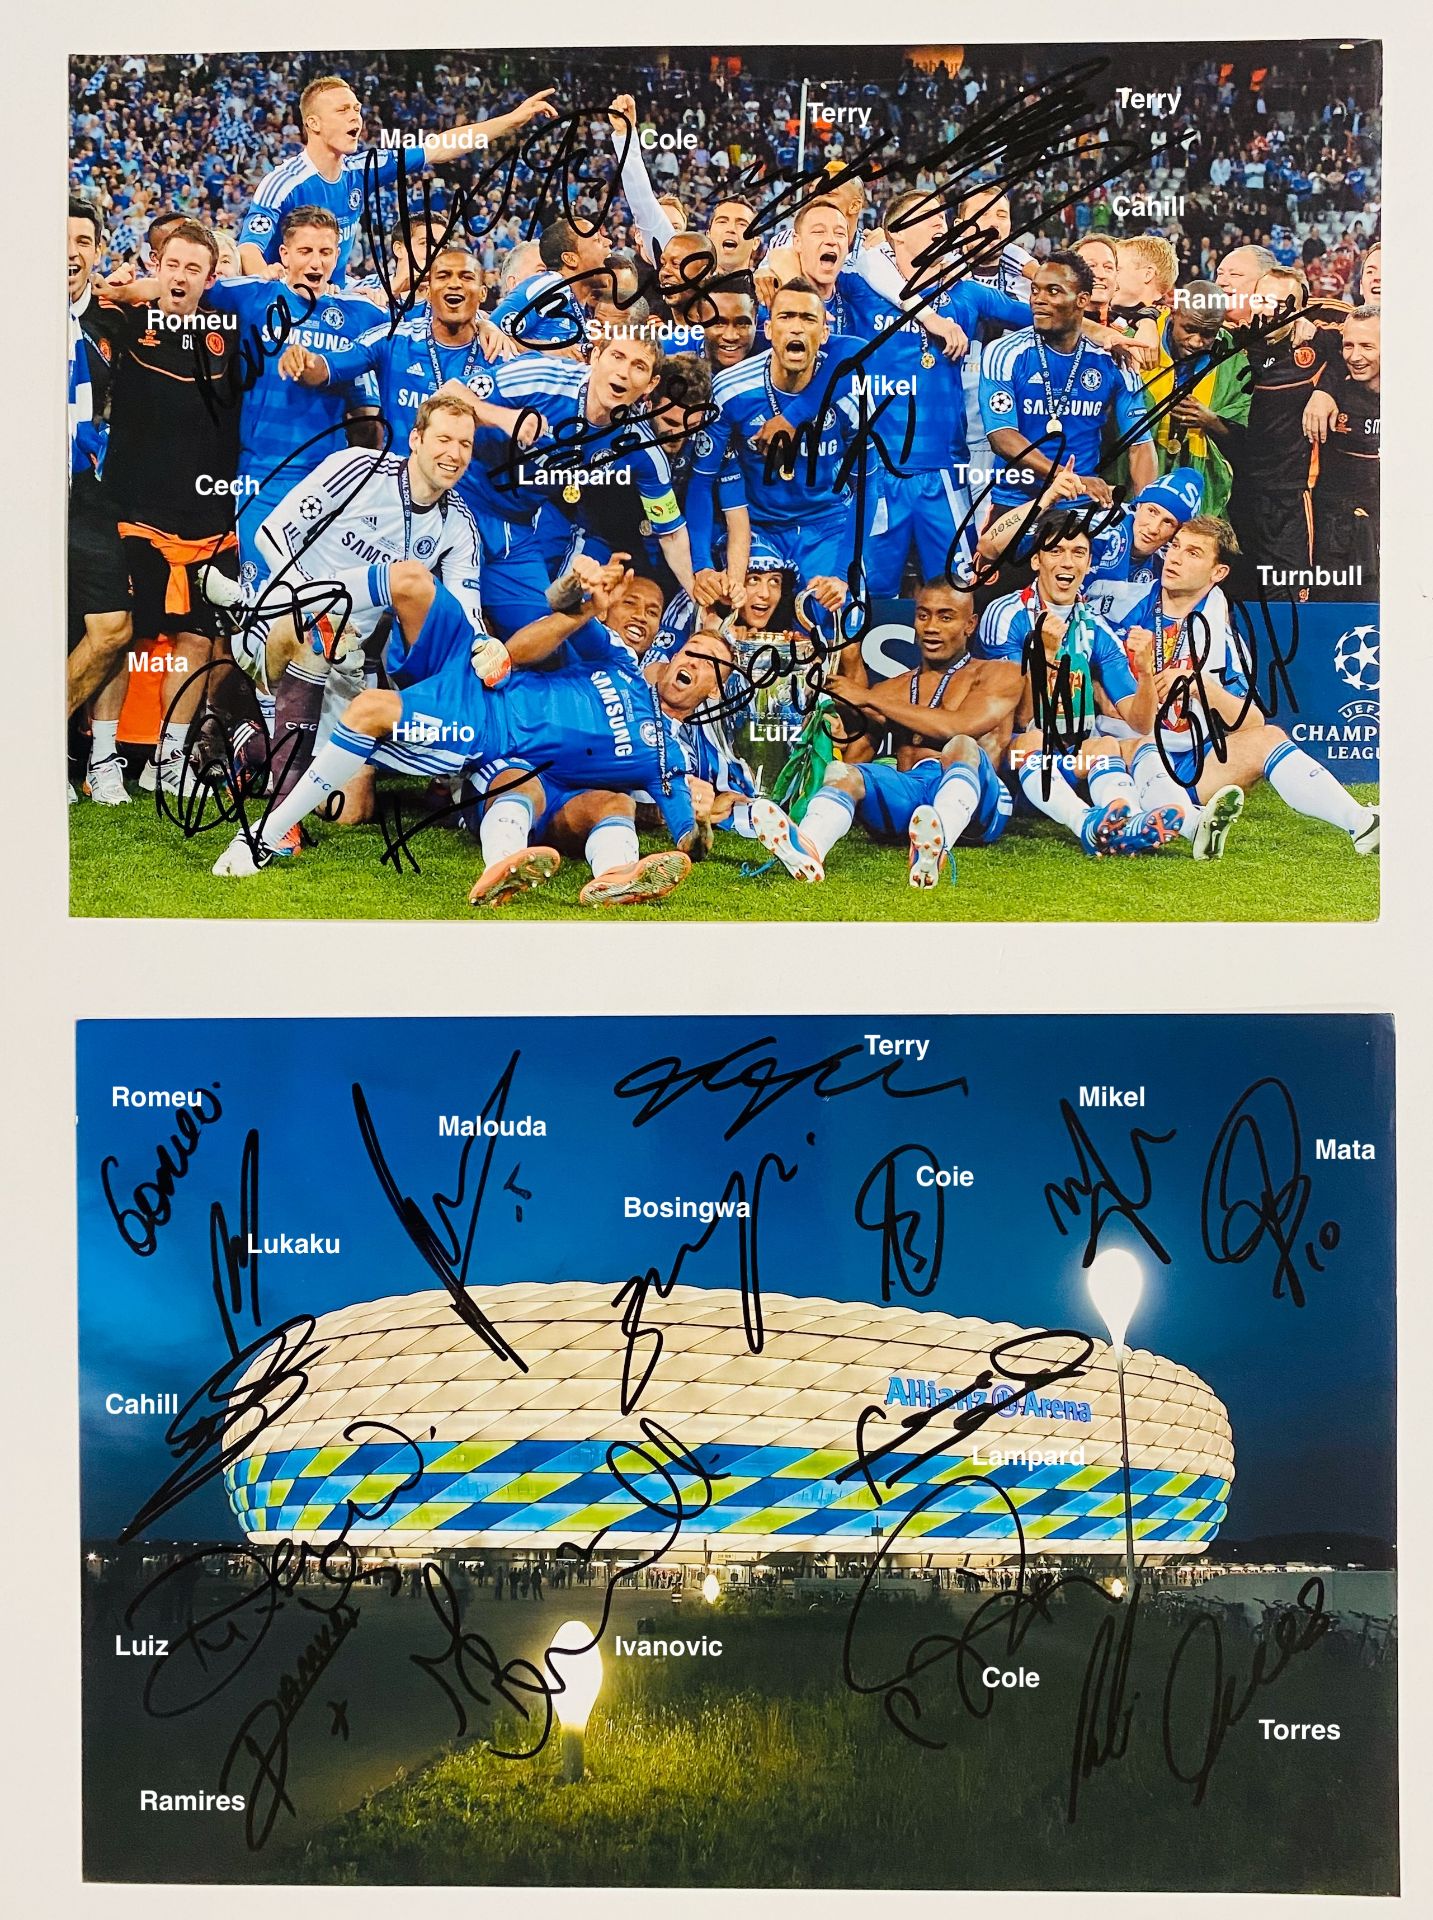 Chelsea 2011/12 Champions League winners signed jersey - Image 2 of 3